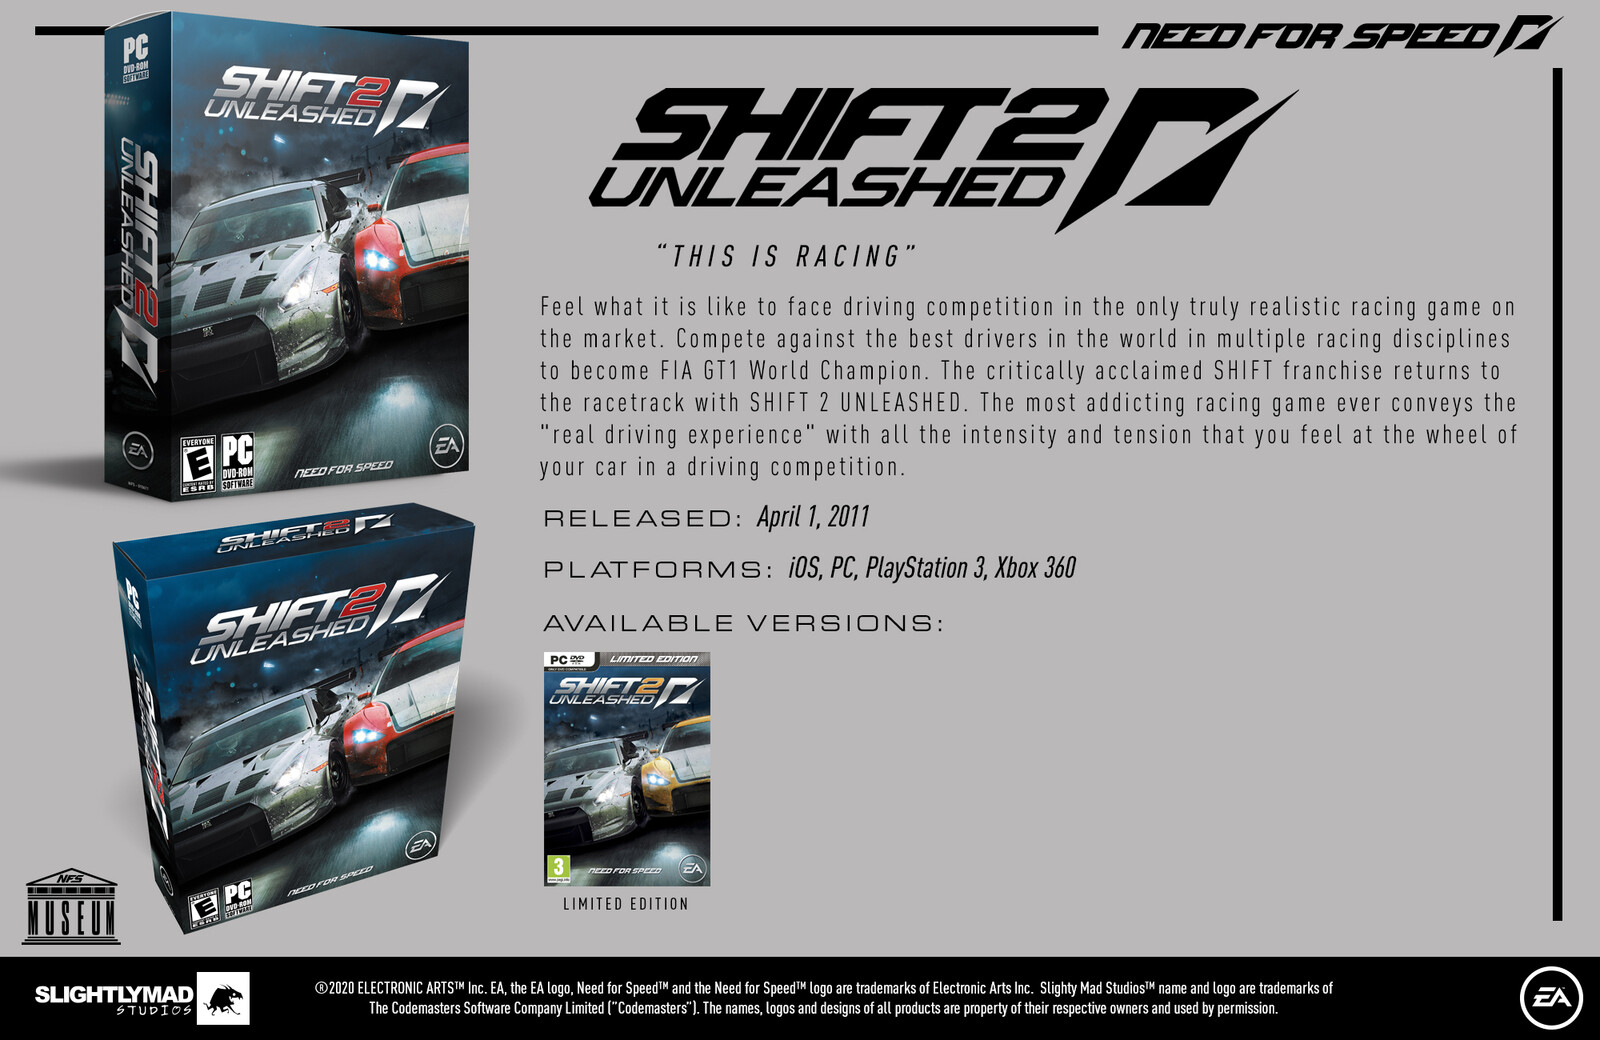 Need for Speed Shift 2 Unleashed (2001) - Museum Slide